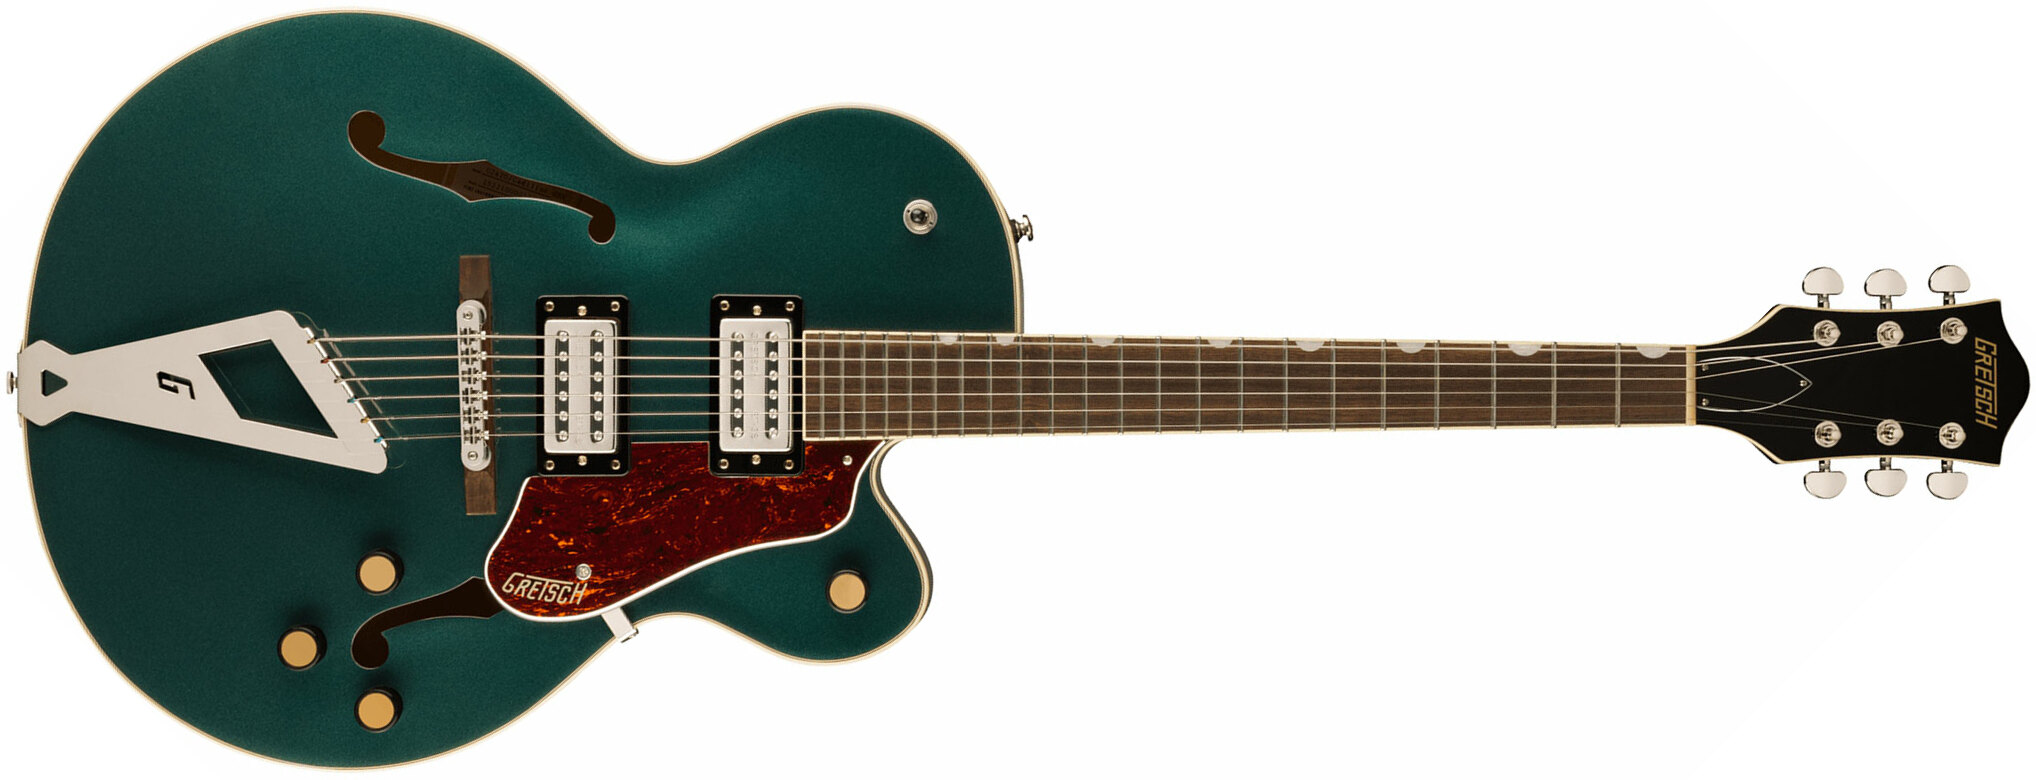 Gretsch G2420 Streamliner Hollow Body With Chromatic Ii 2h Ht Lau - Cadillac Green - Guitare Électrique 3/4 Caisse & Jazz - Main picture